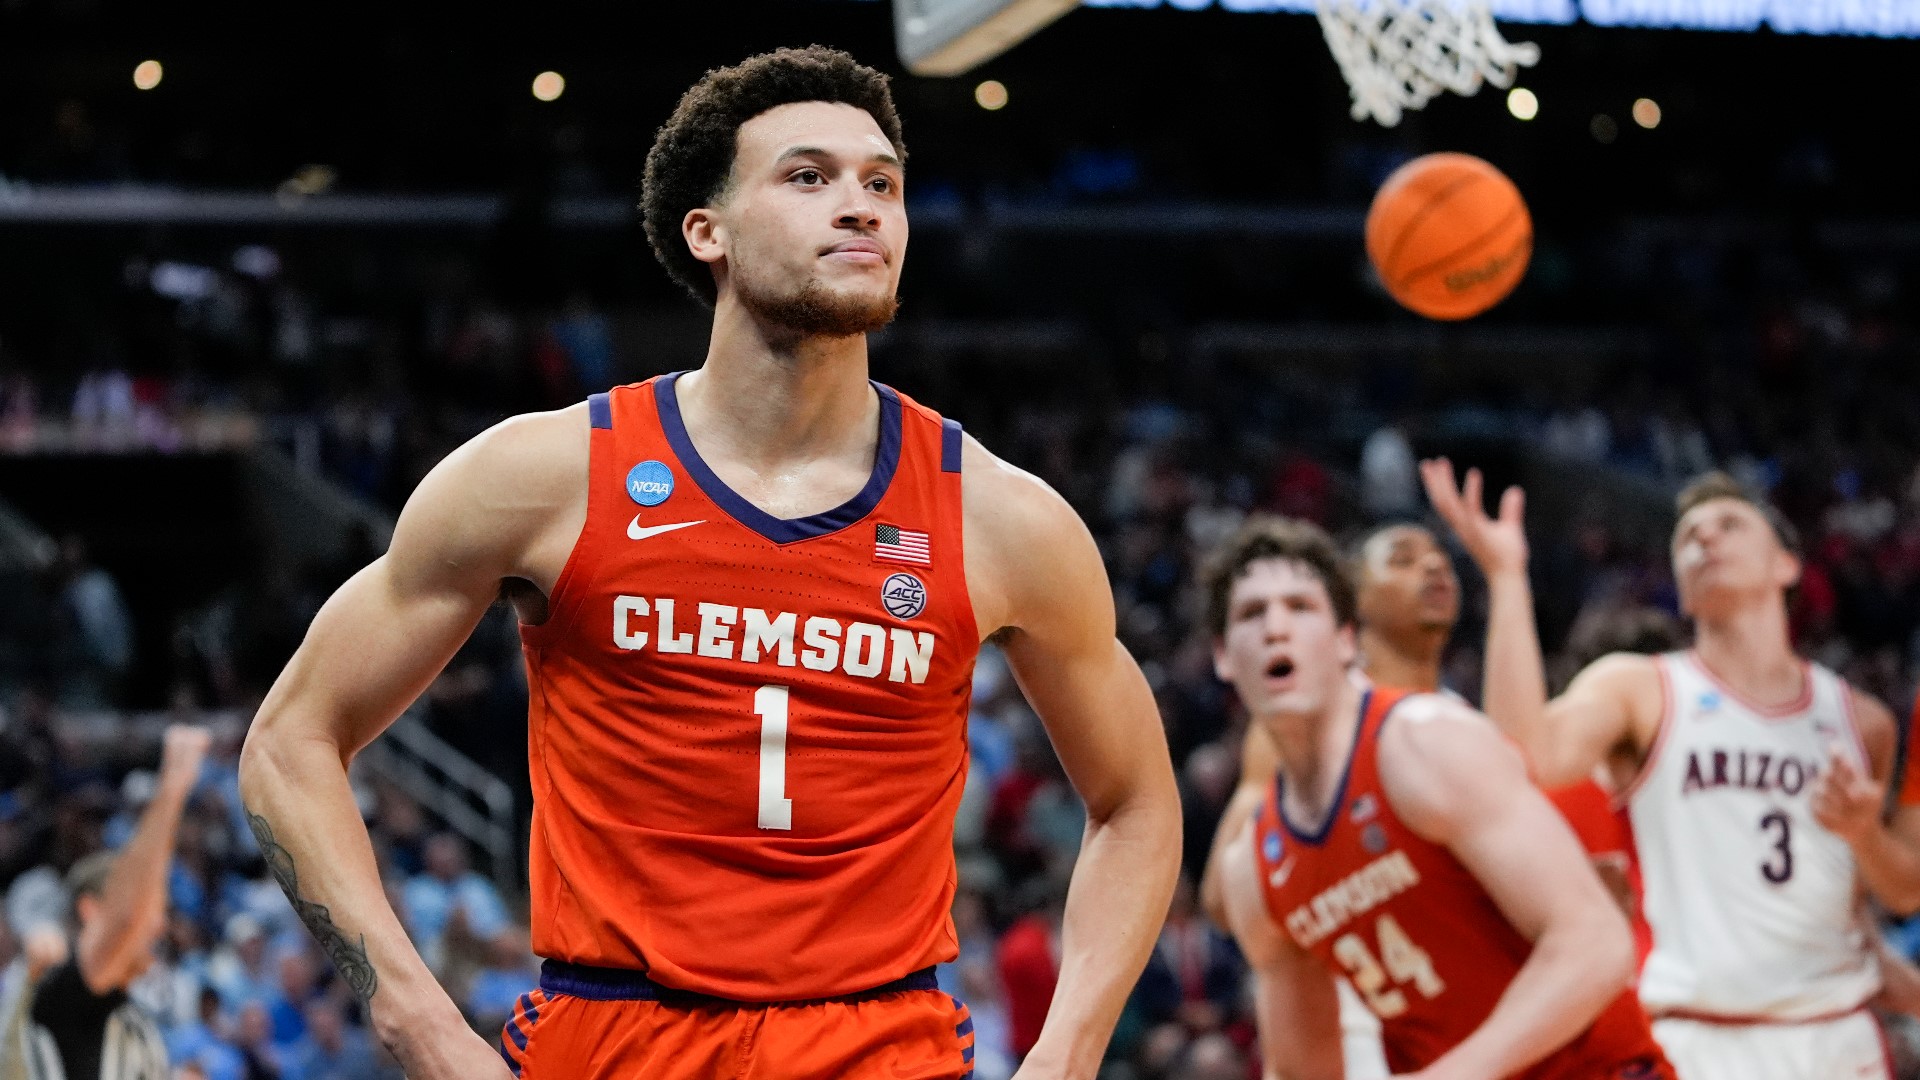 For the first time since 1980, Clemson is in the Elite 8 after a 77-72 win over Arizona.